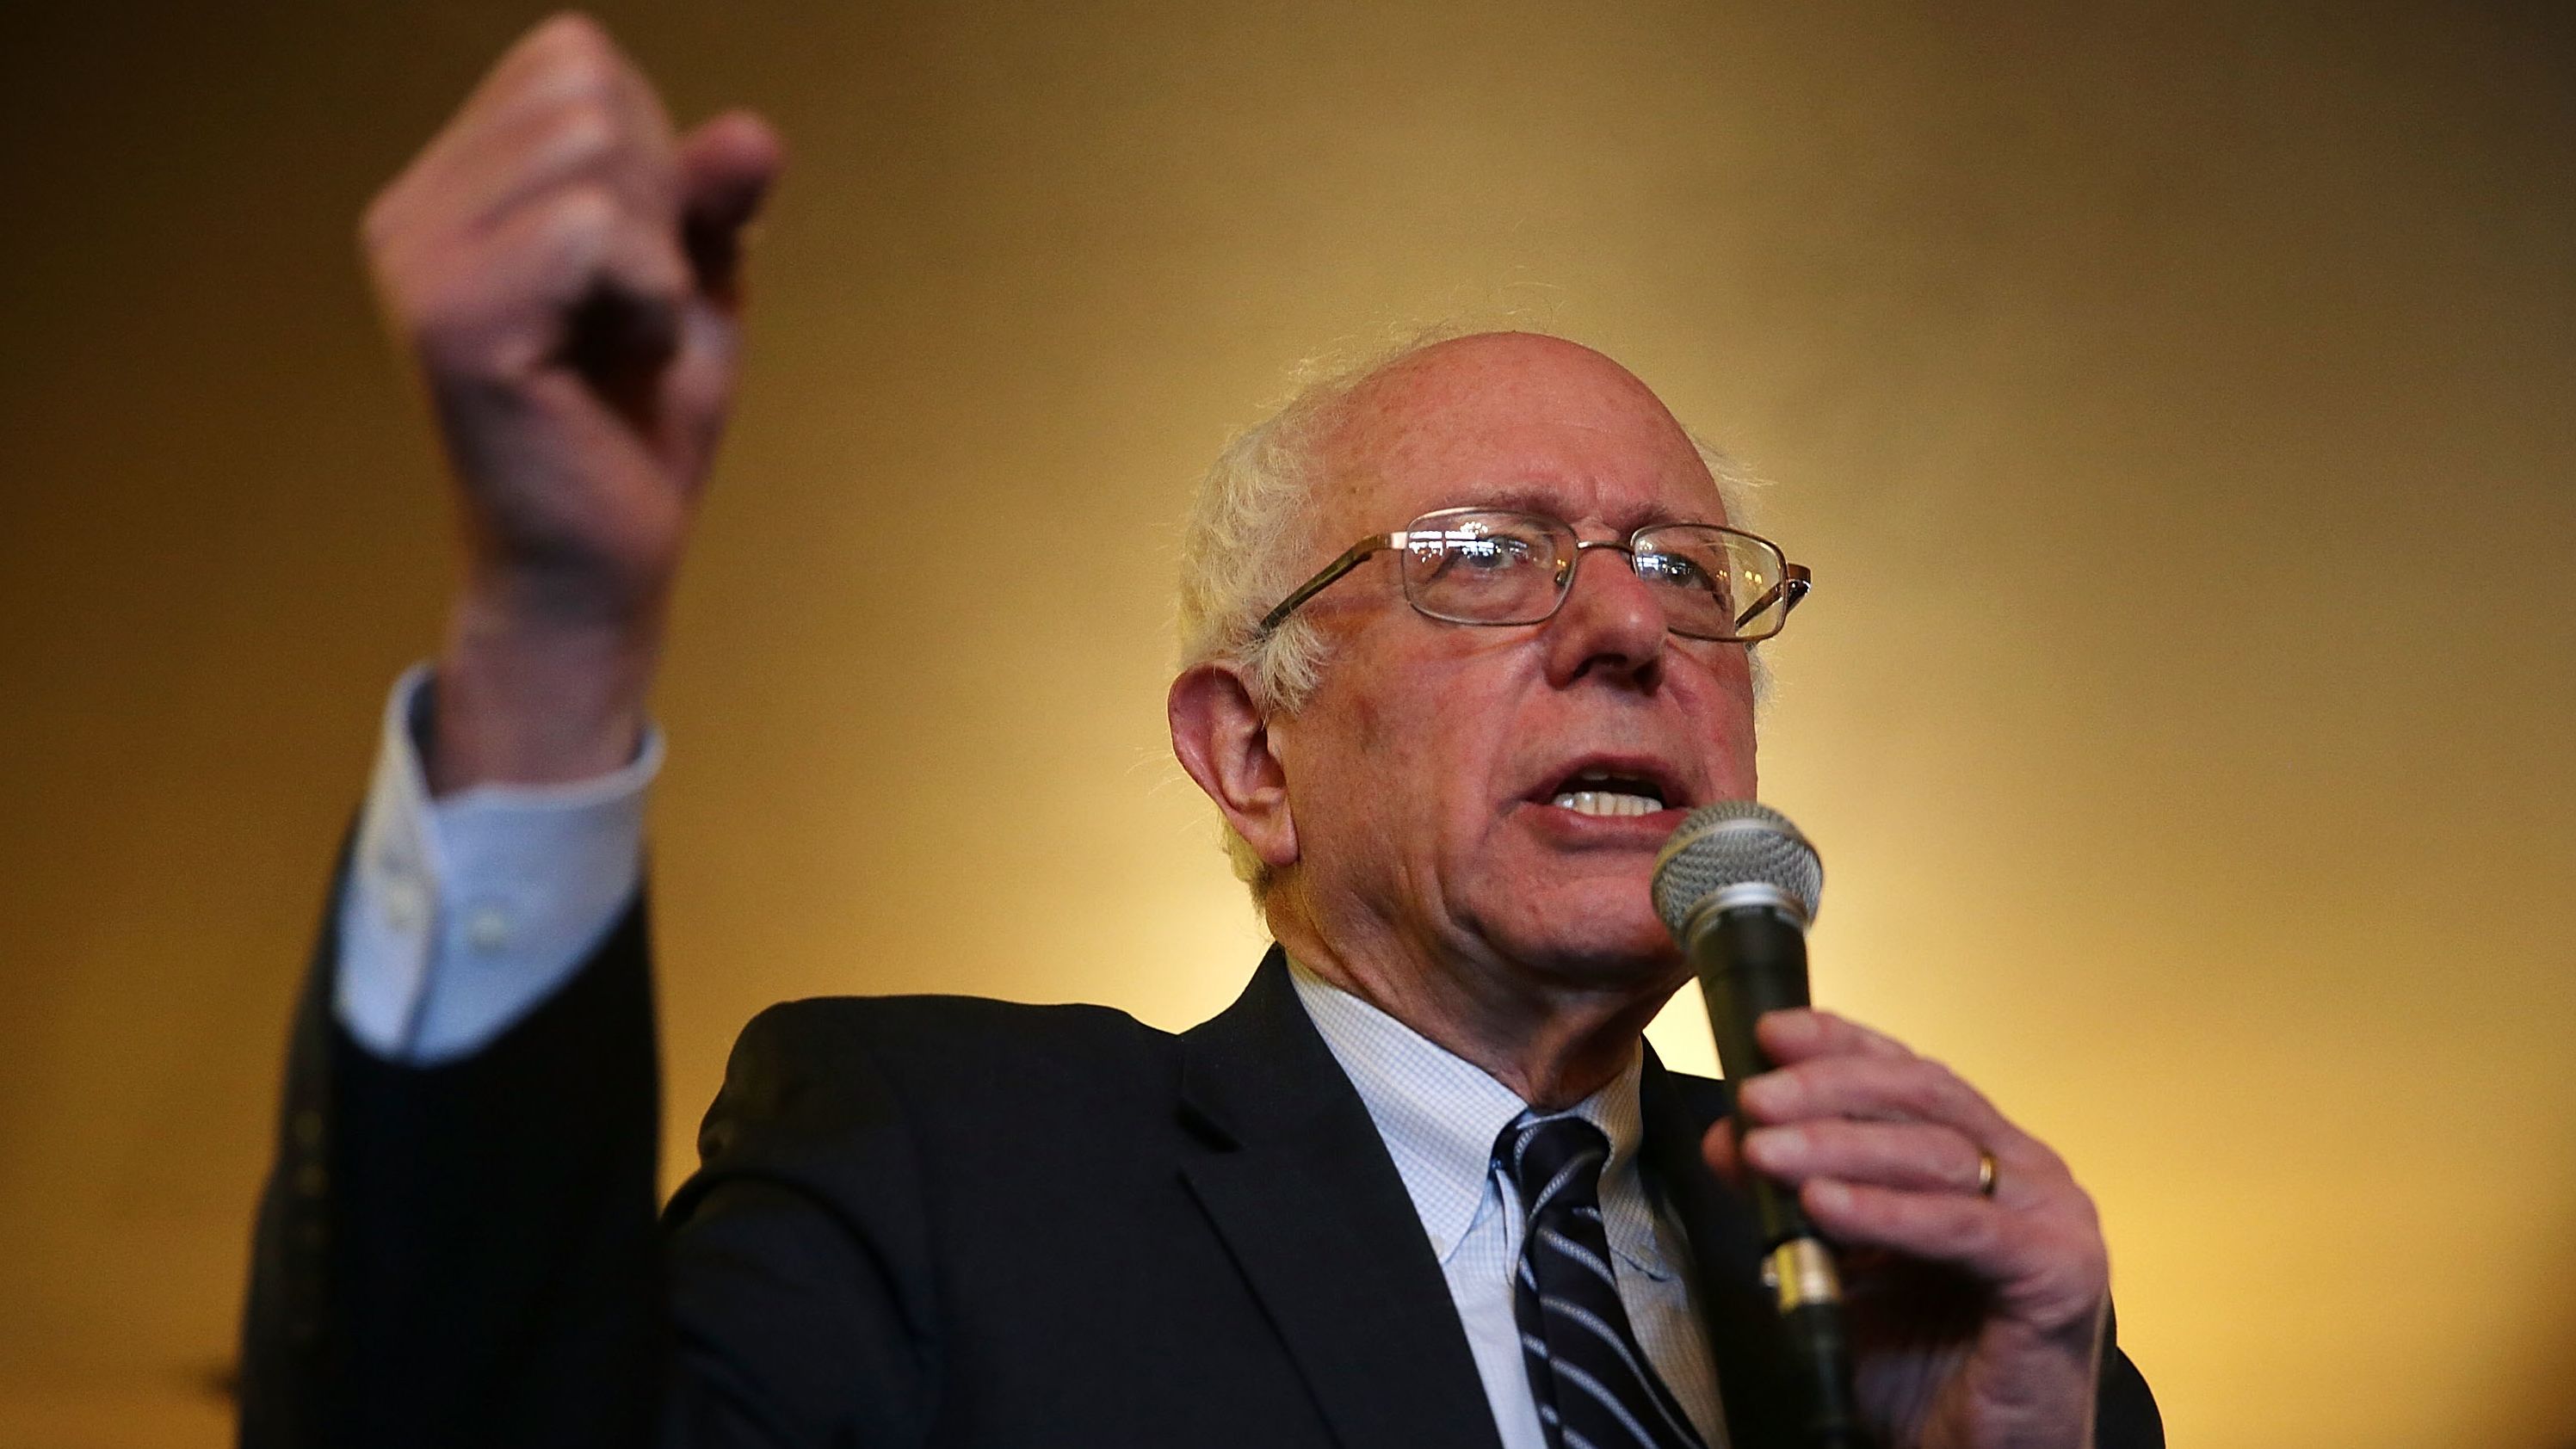 Bernie Sanders plans to escalate campaign in Iowa and New Hampshire as